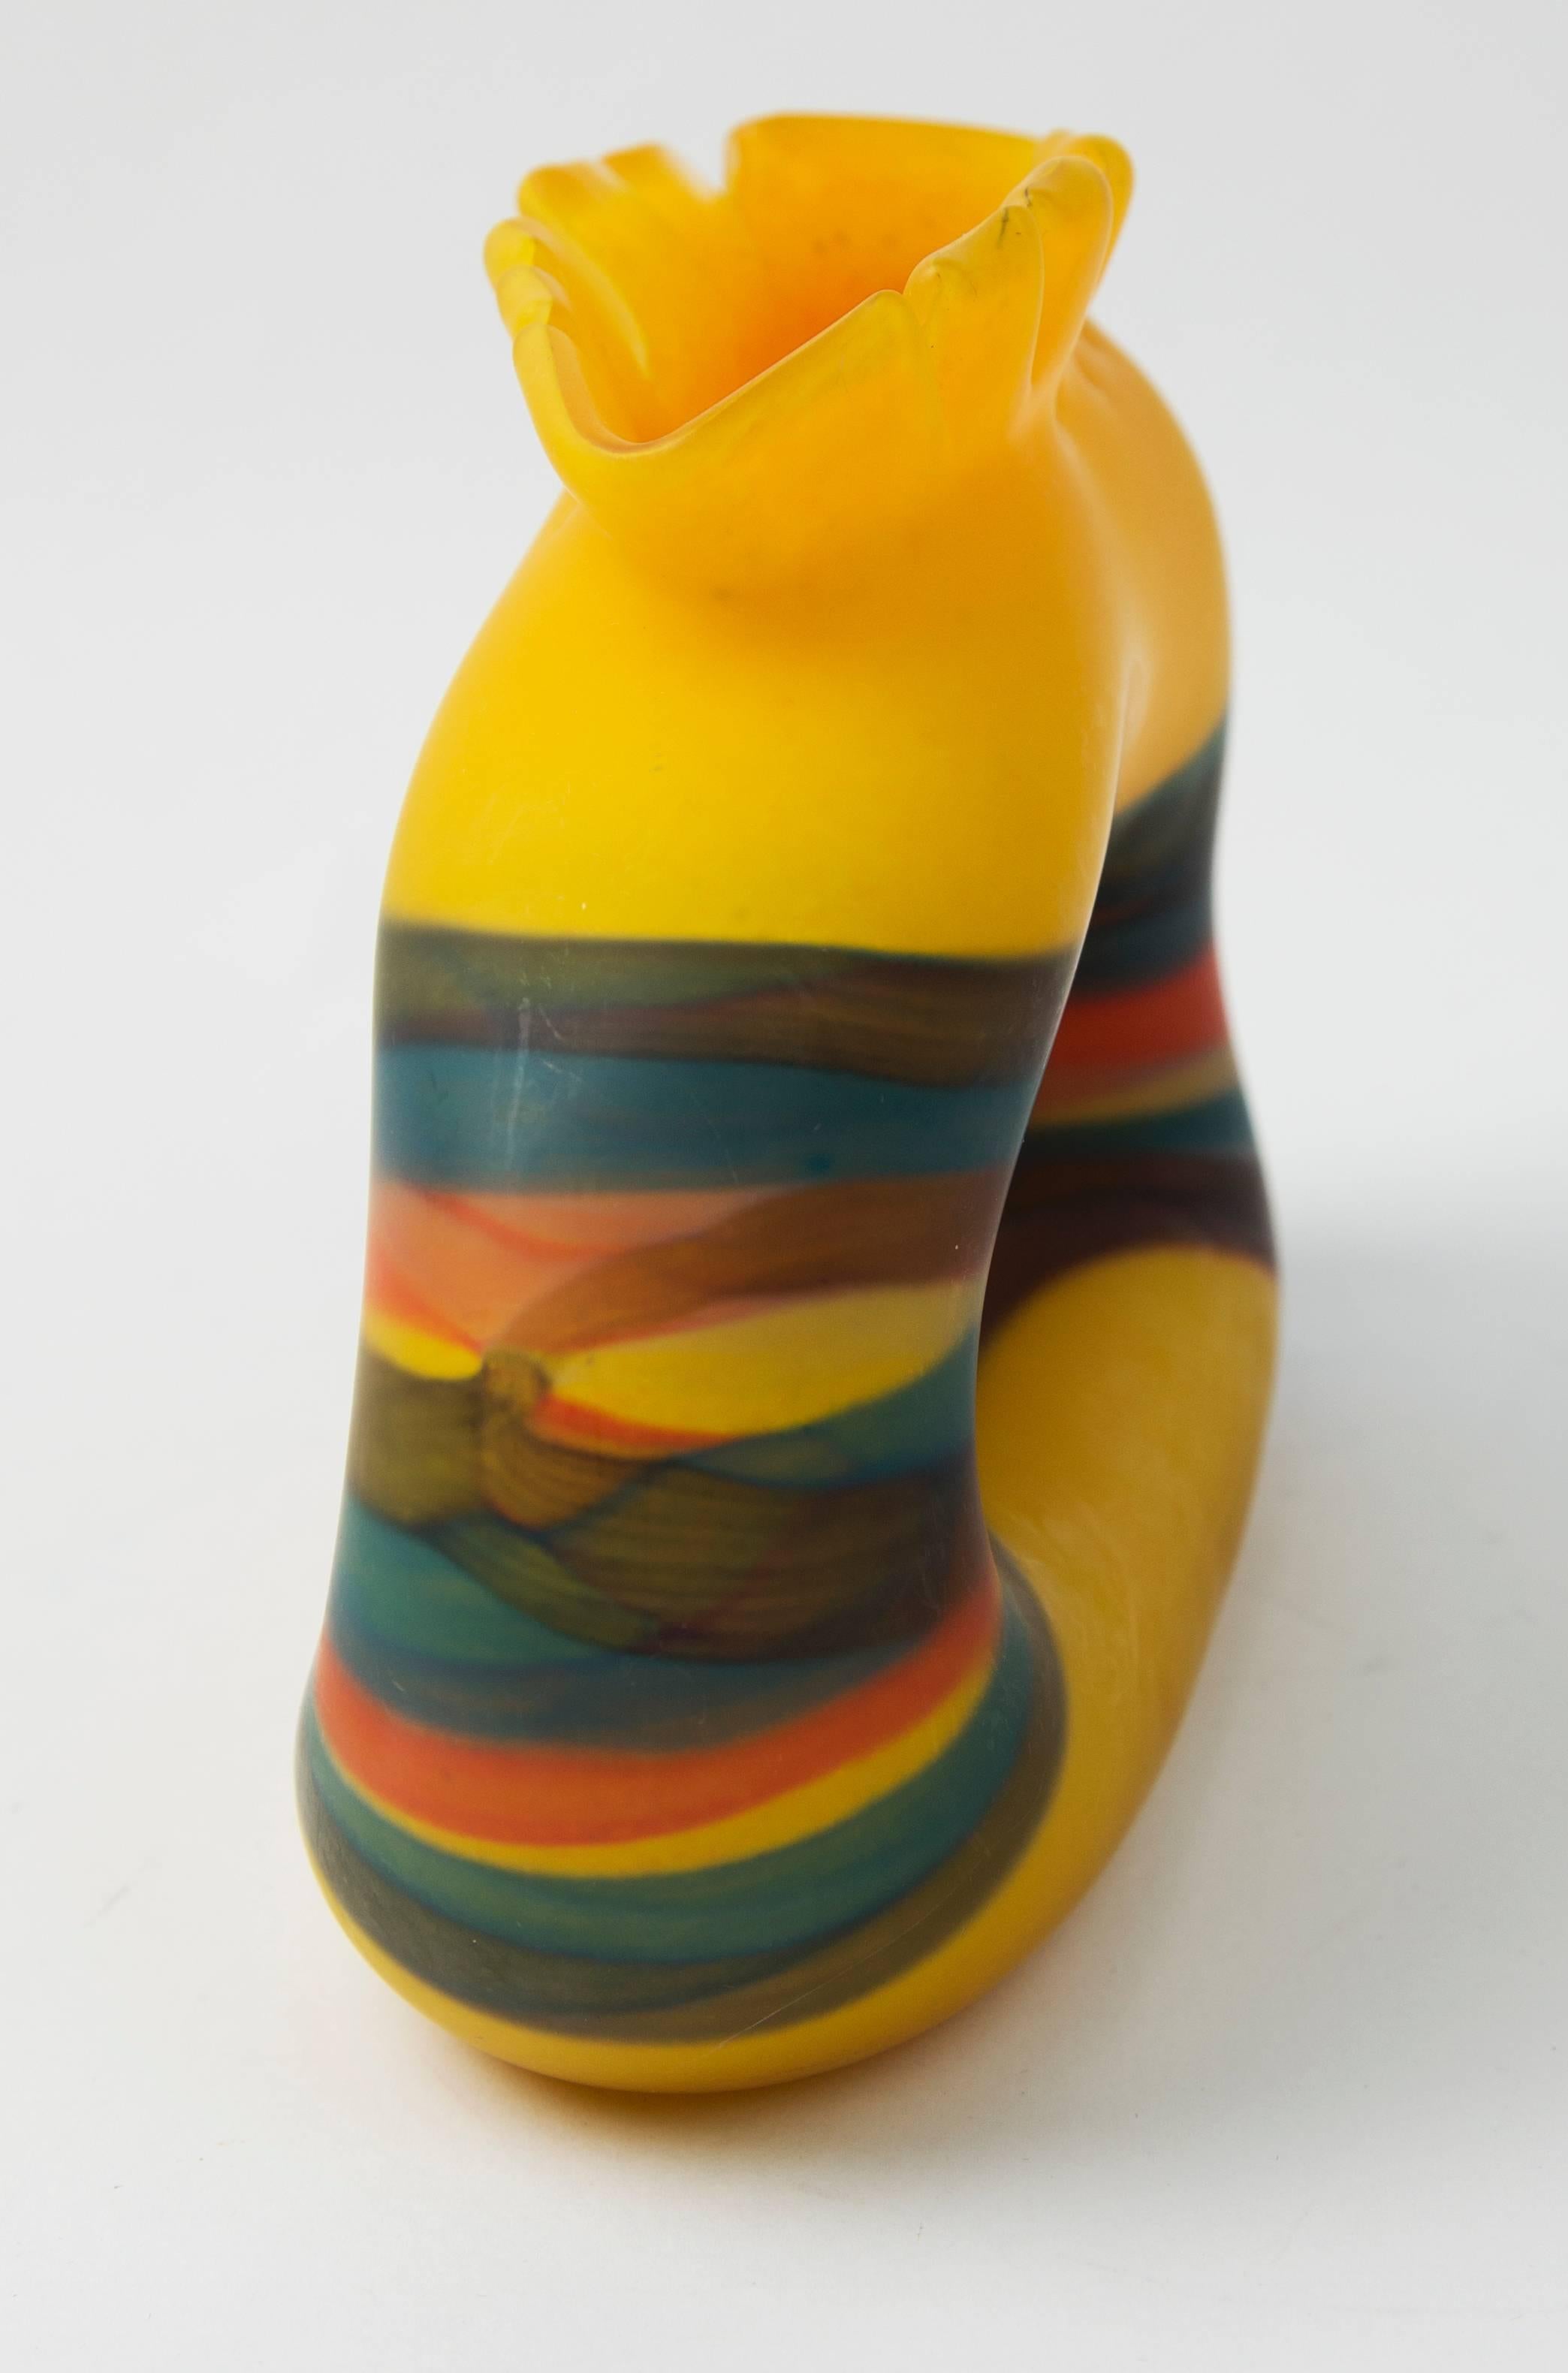 Vivid yellow and multi-color striped ovoid form vase hand blown by renowned Romanian glass artist Ioan Nemtoi (b. 1964-).
The snipped yellow lip over luminous matte yellow base with pinched center delineated by flowing multicolor bands creates a